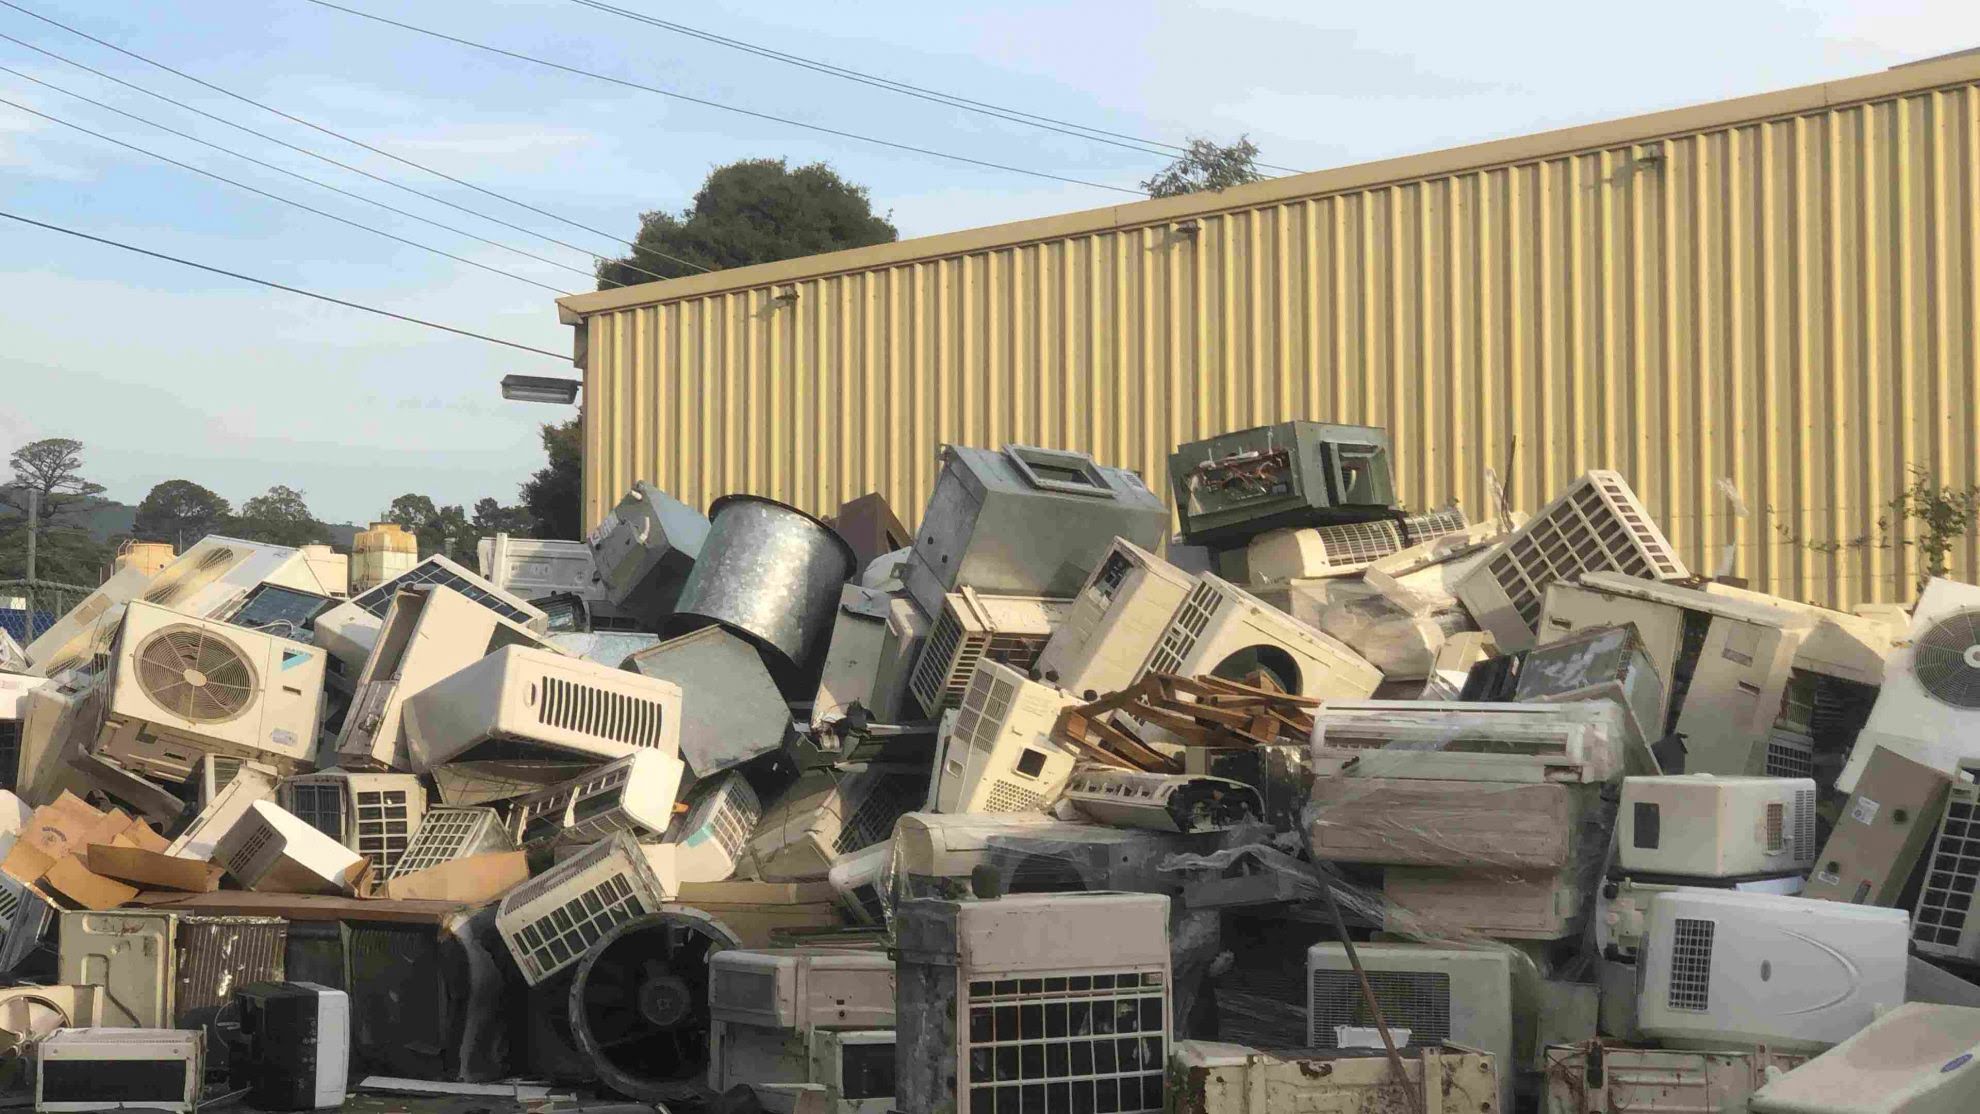 How Much Is A Central AC Unit Worth In Scrap